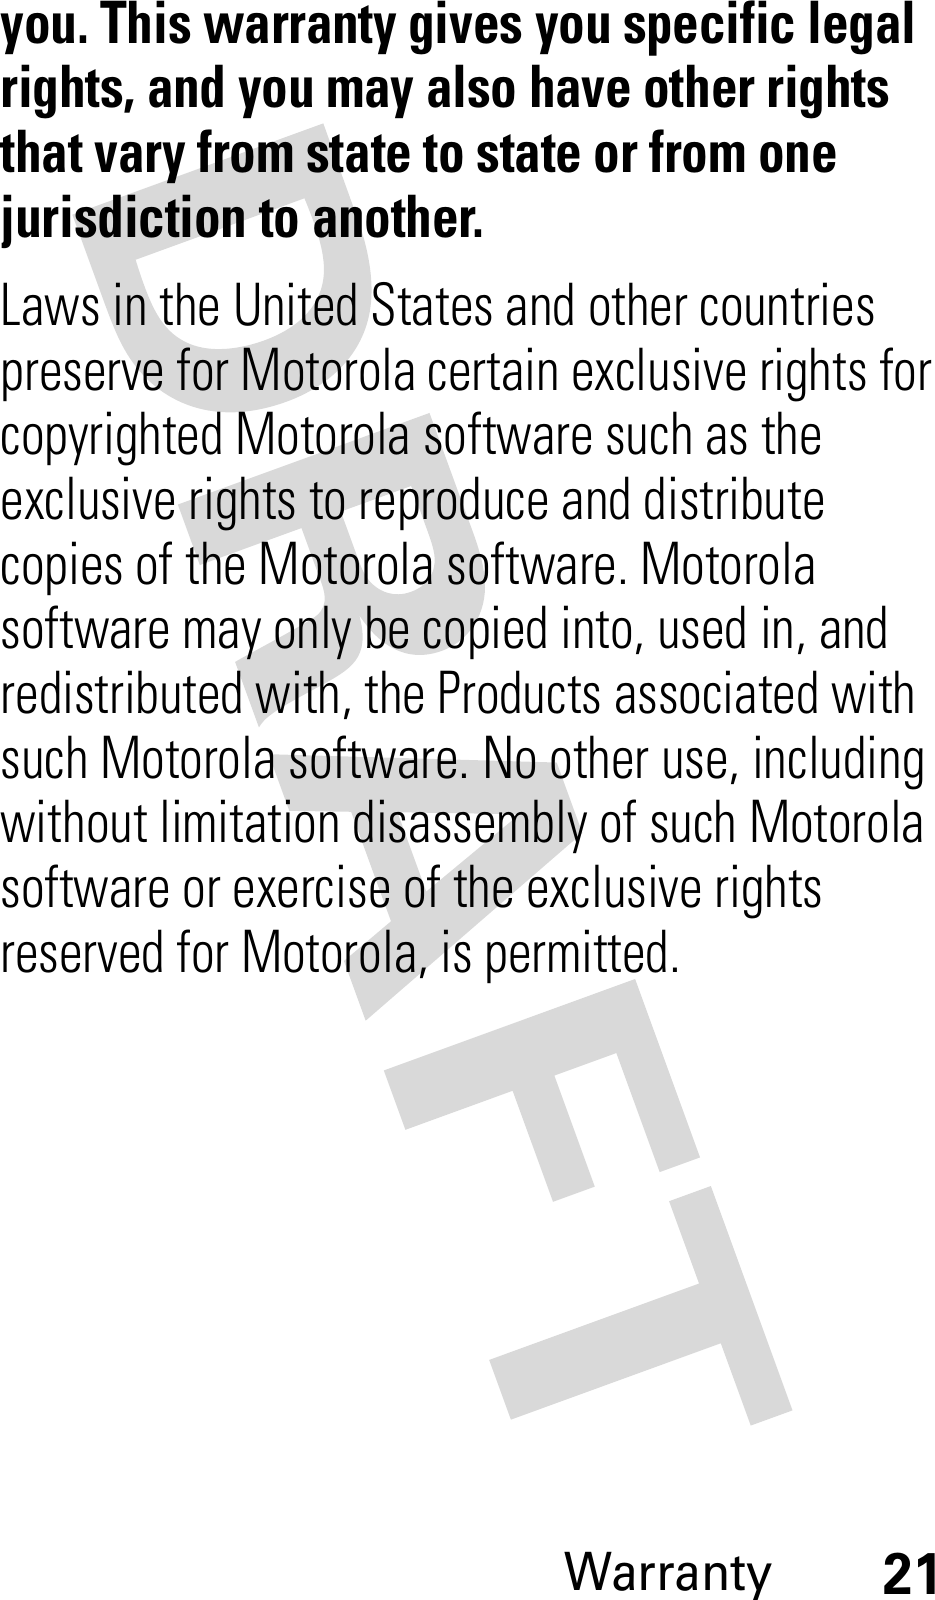 Warranty21you. This warranty gives you specific legal rights, and you may also have other rights that vary from state to state or from one jurisdiction to another.Laws in the United States and other countries preserve for Motorola certain exclusive rights for copyrighted Motorola software such as the exclusive rights to reproduce and distribute copies of the Motorola software. Motorola software may only be copied into, used in, and redistributed with, the Products associated with such Motorola software. No other use, including without limitation disassembly of such Motorola software or exercise of the exclusive rights reserved for Motorola, is permitted.